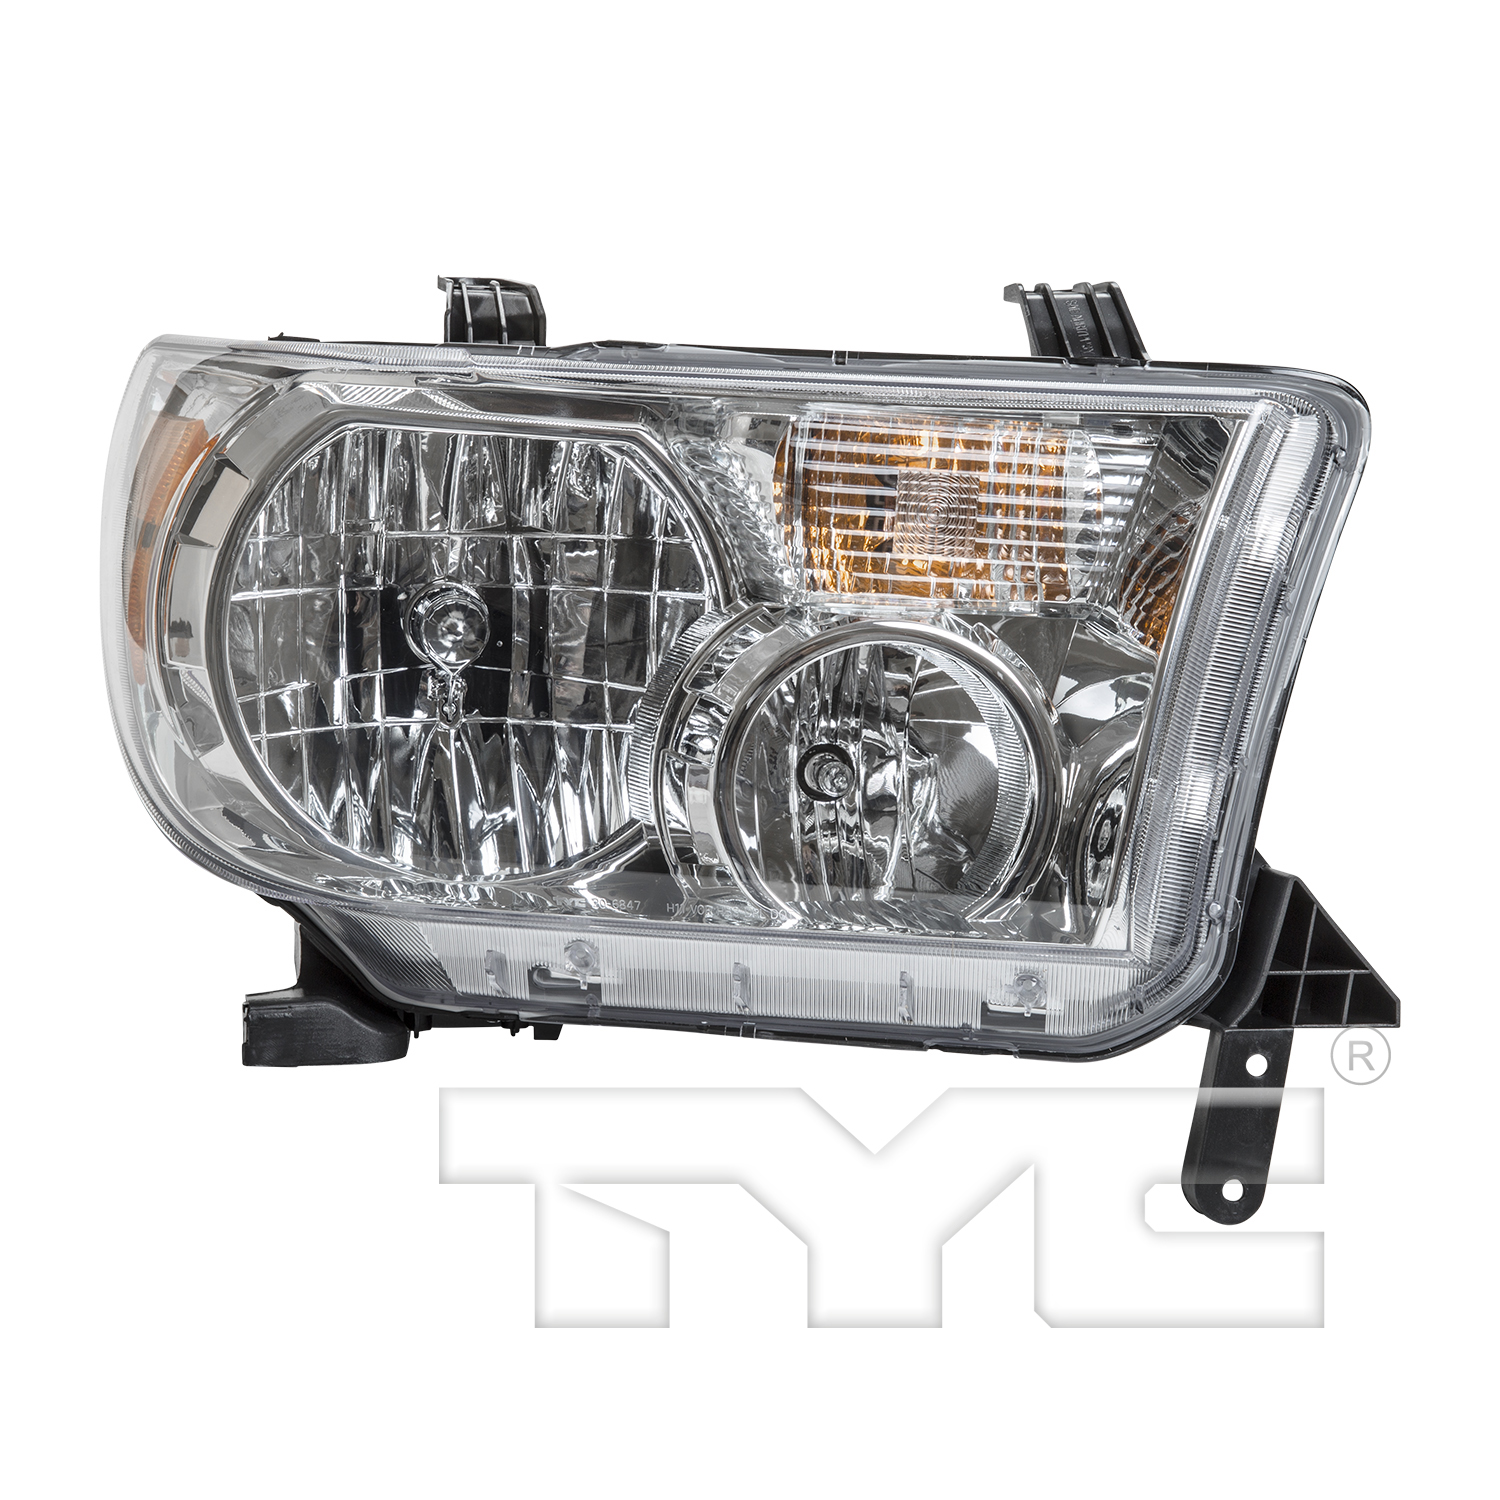 Aftermarket HEADLIGHTS for TOYOTA - SEQUOIA, SEQUOIA,08-17,RT Headlamp assy composite